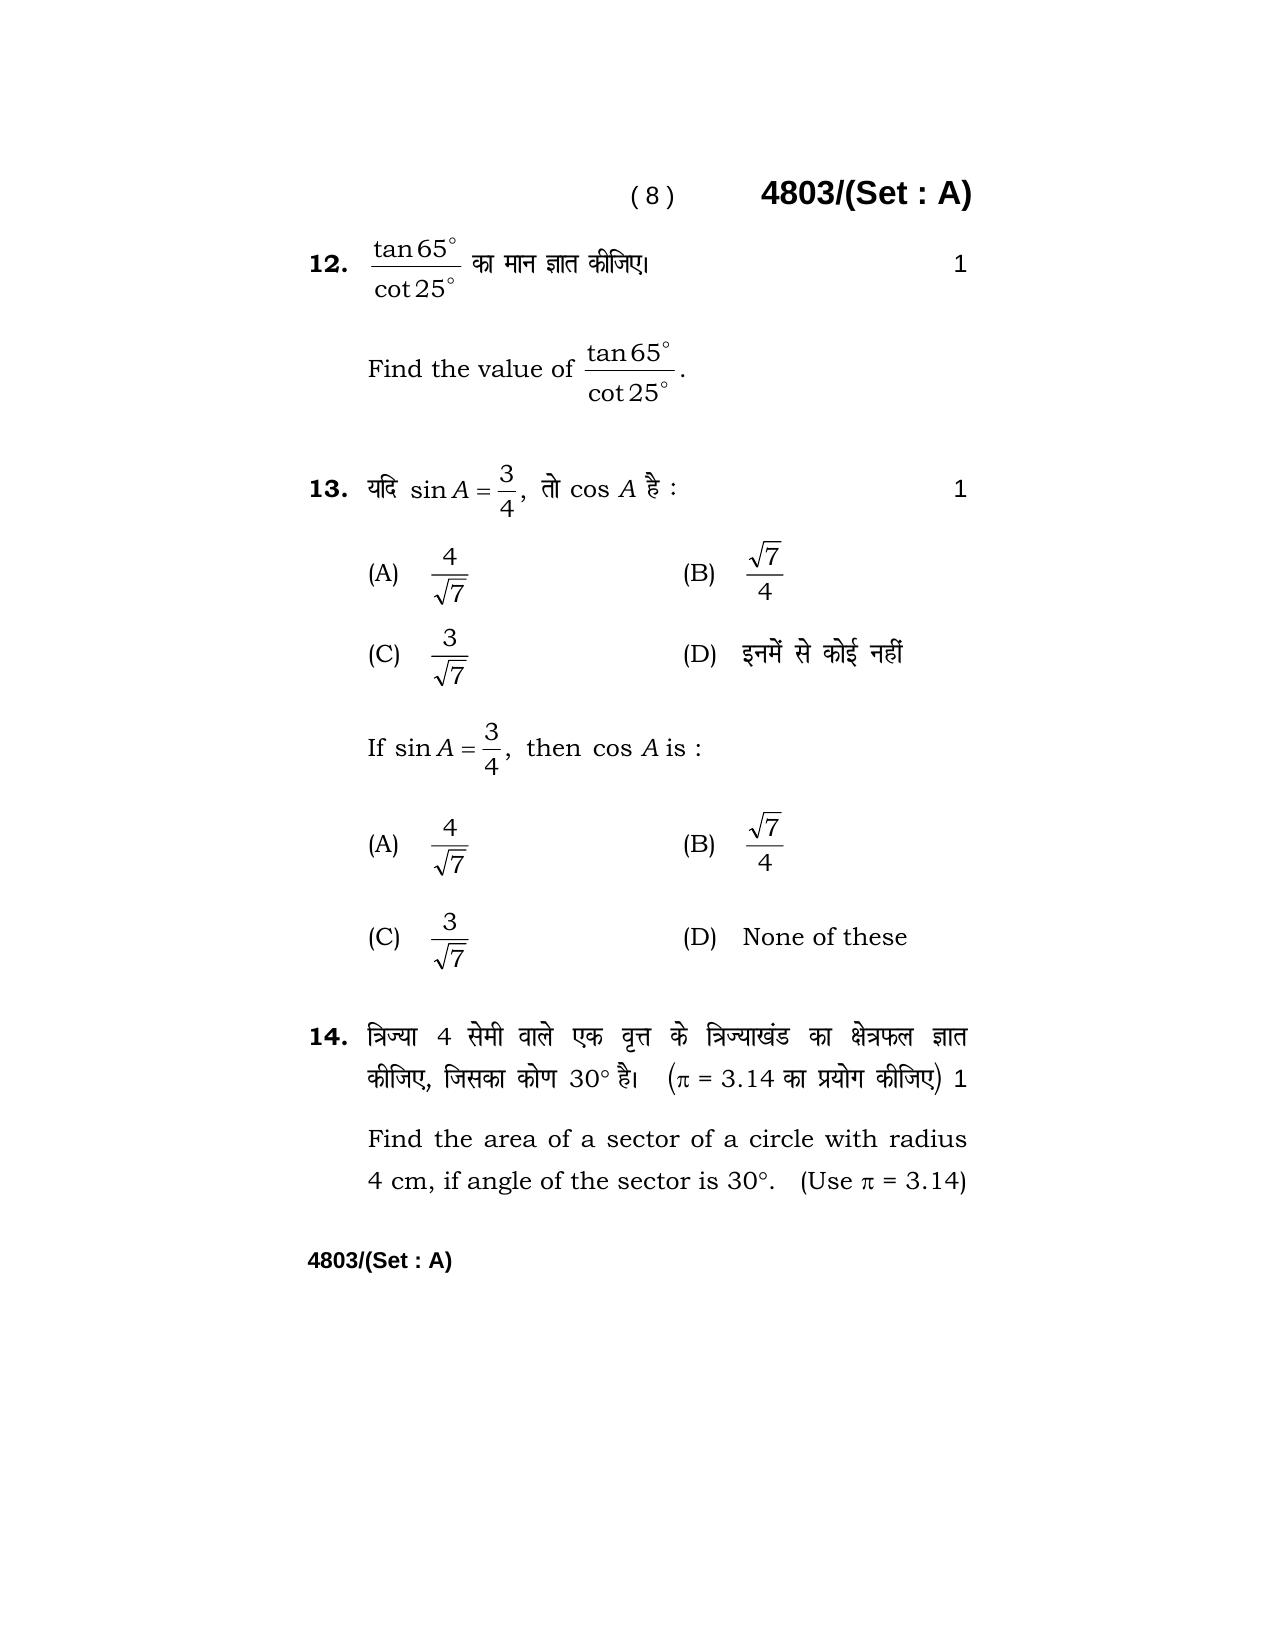 Haryana Board HBSE Class 10 Mathematics 2020 Question Paper - Page 8